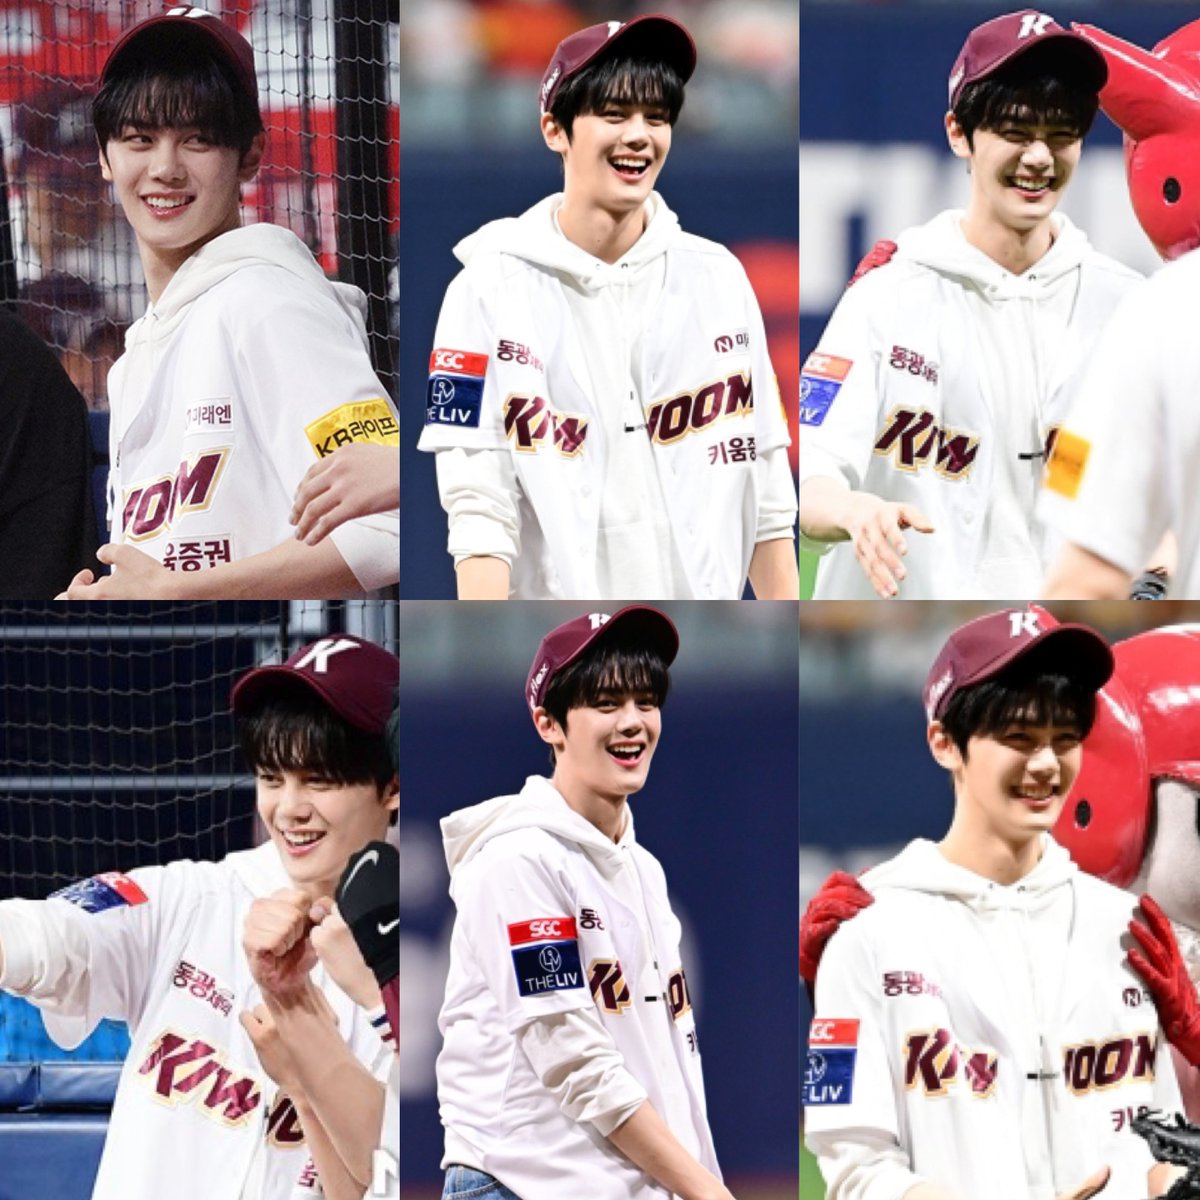 gyuvin looks so happy in today's baseball game, I love to see his big smile 🥺